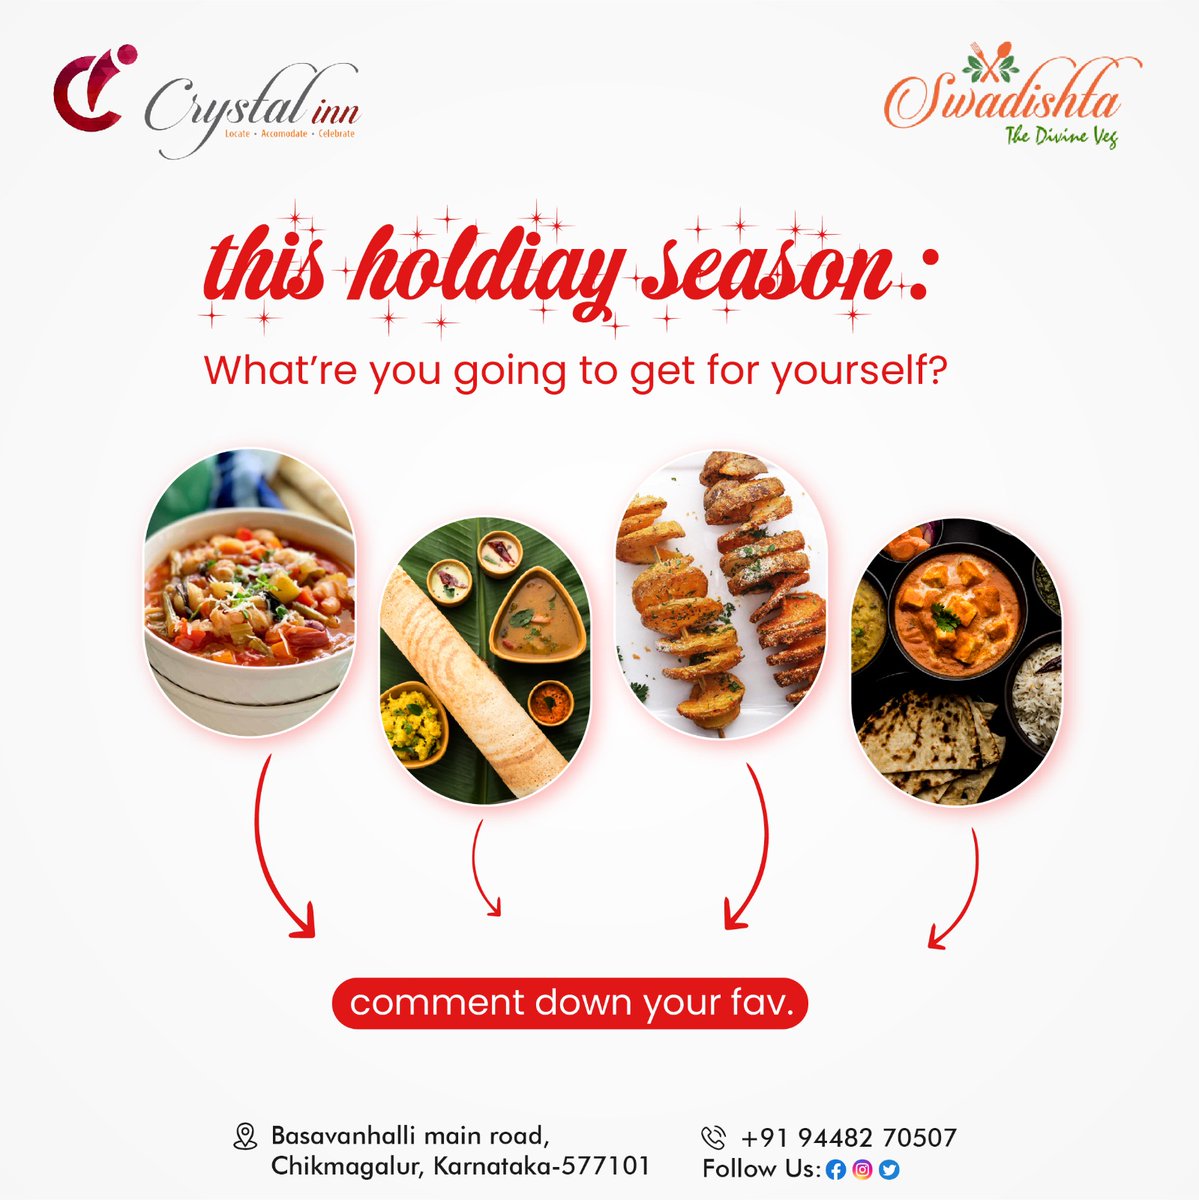 Visit today to experience the food made with love ❤️ only for you

Book your Table Now!
📞 94482 70507
.
.
.
.
.
.
#ChristmasDelights #FestiveFeast #LasagnaLove #HolidayEats #SeasonalSavor #JoyfulBites #ChristmasMenu #TastyTraditions